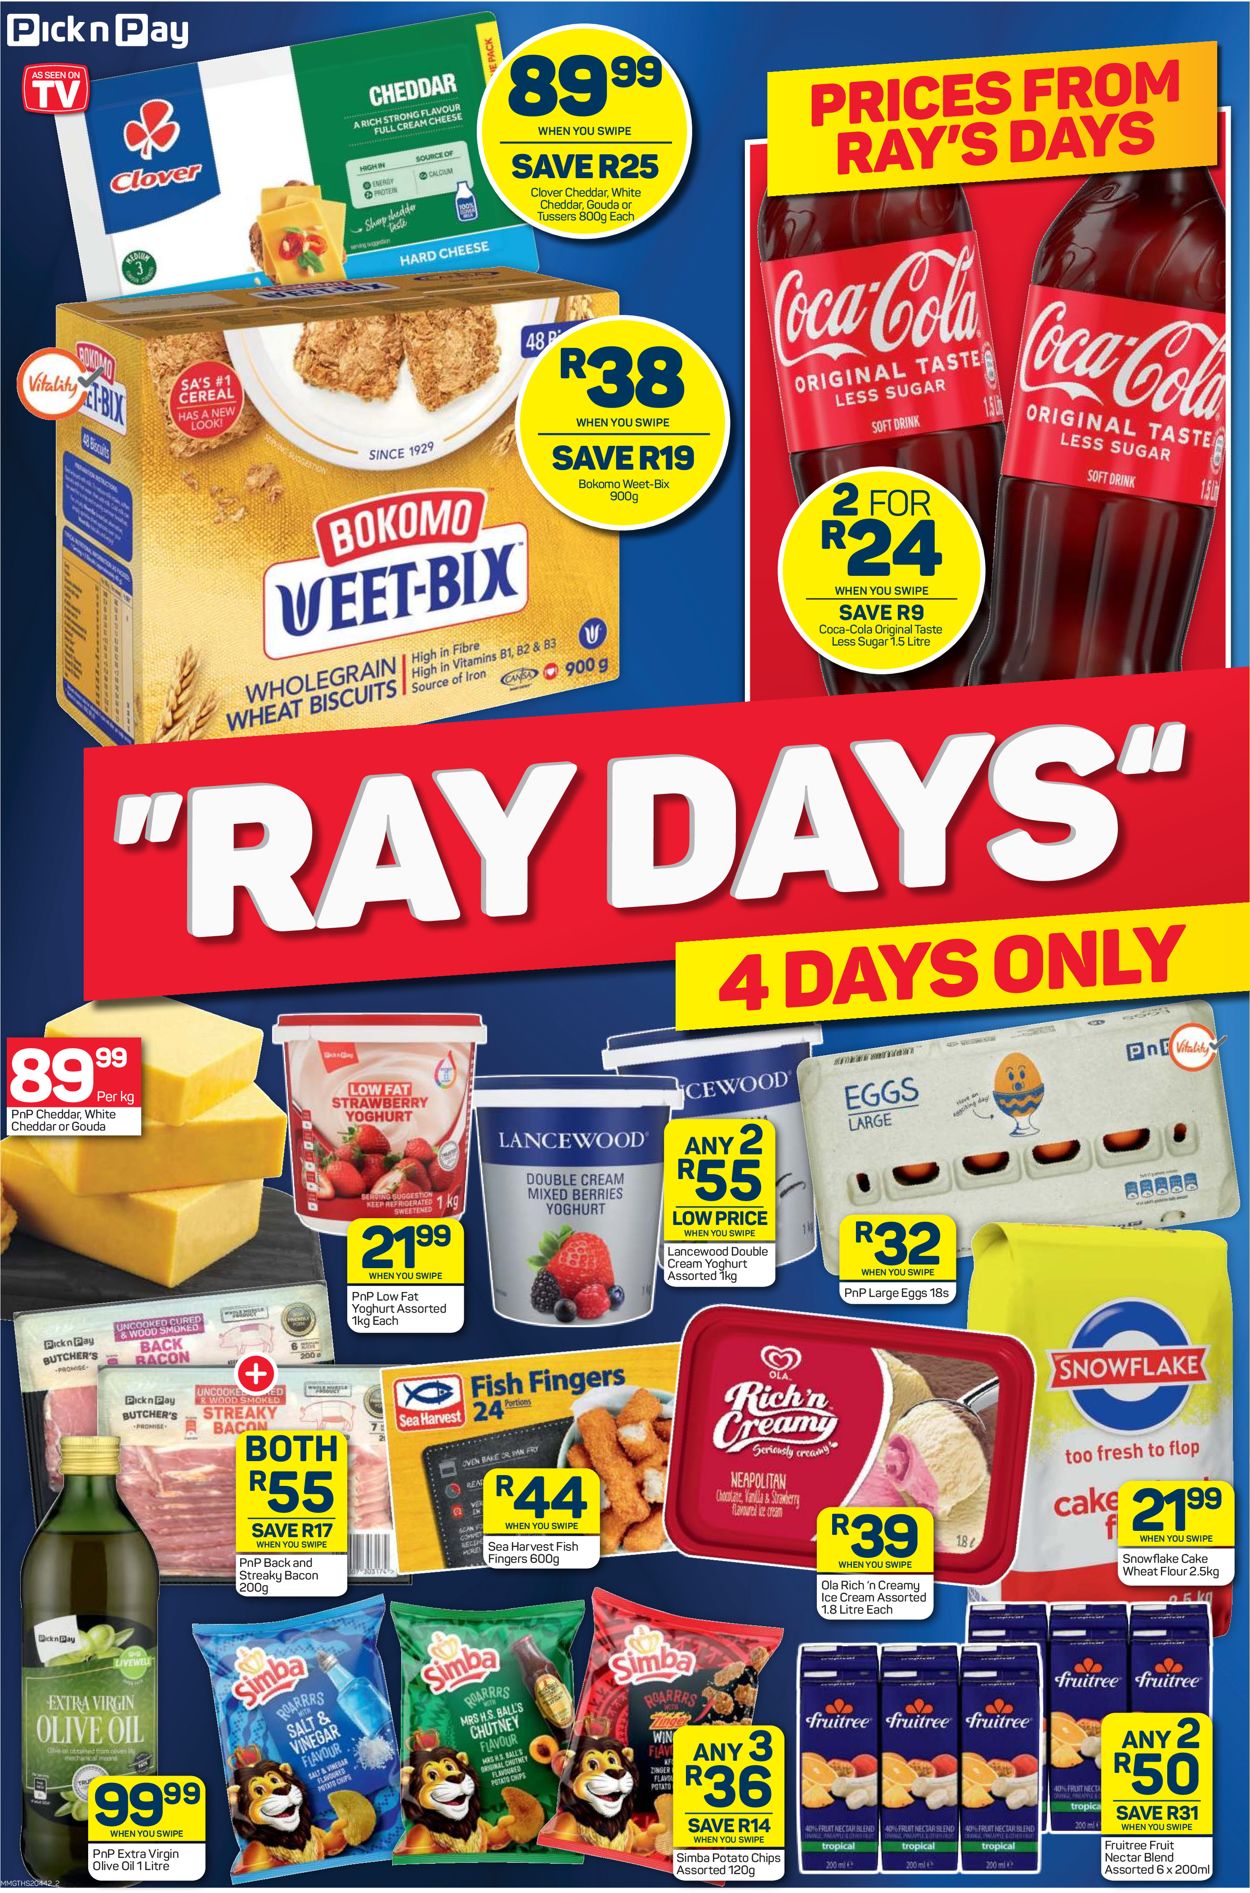 Pick n Pay Catalogue - 2022/05/19-2022/05/22 (Page 2)